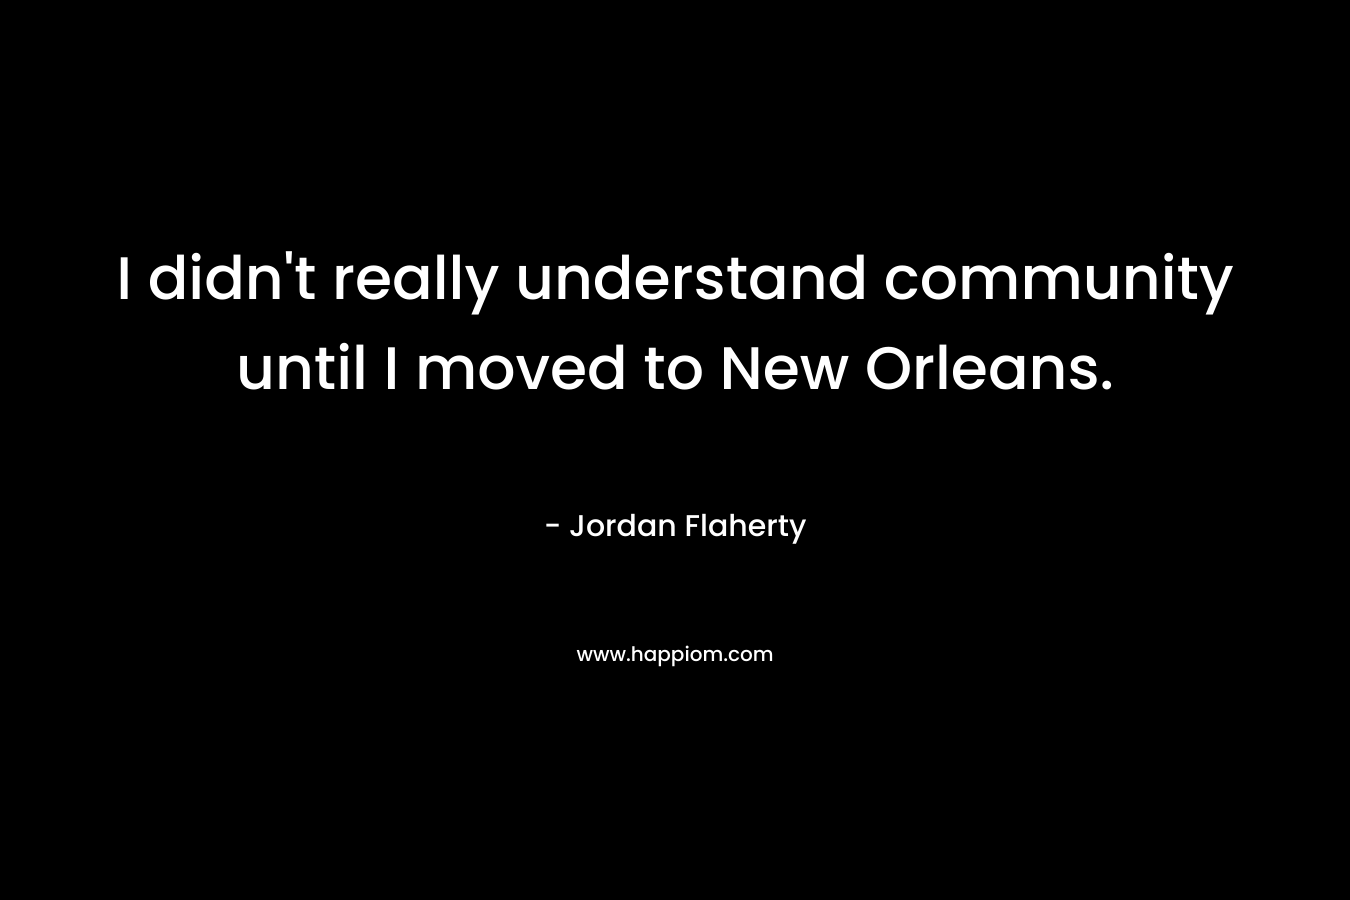 I didn't really understand community until I moved to New Orleans.